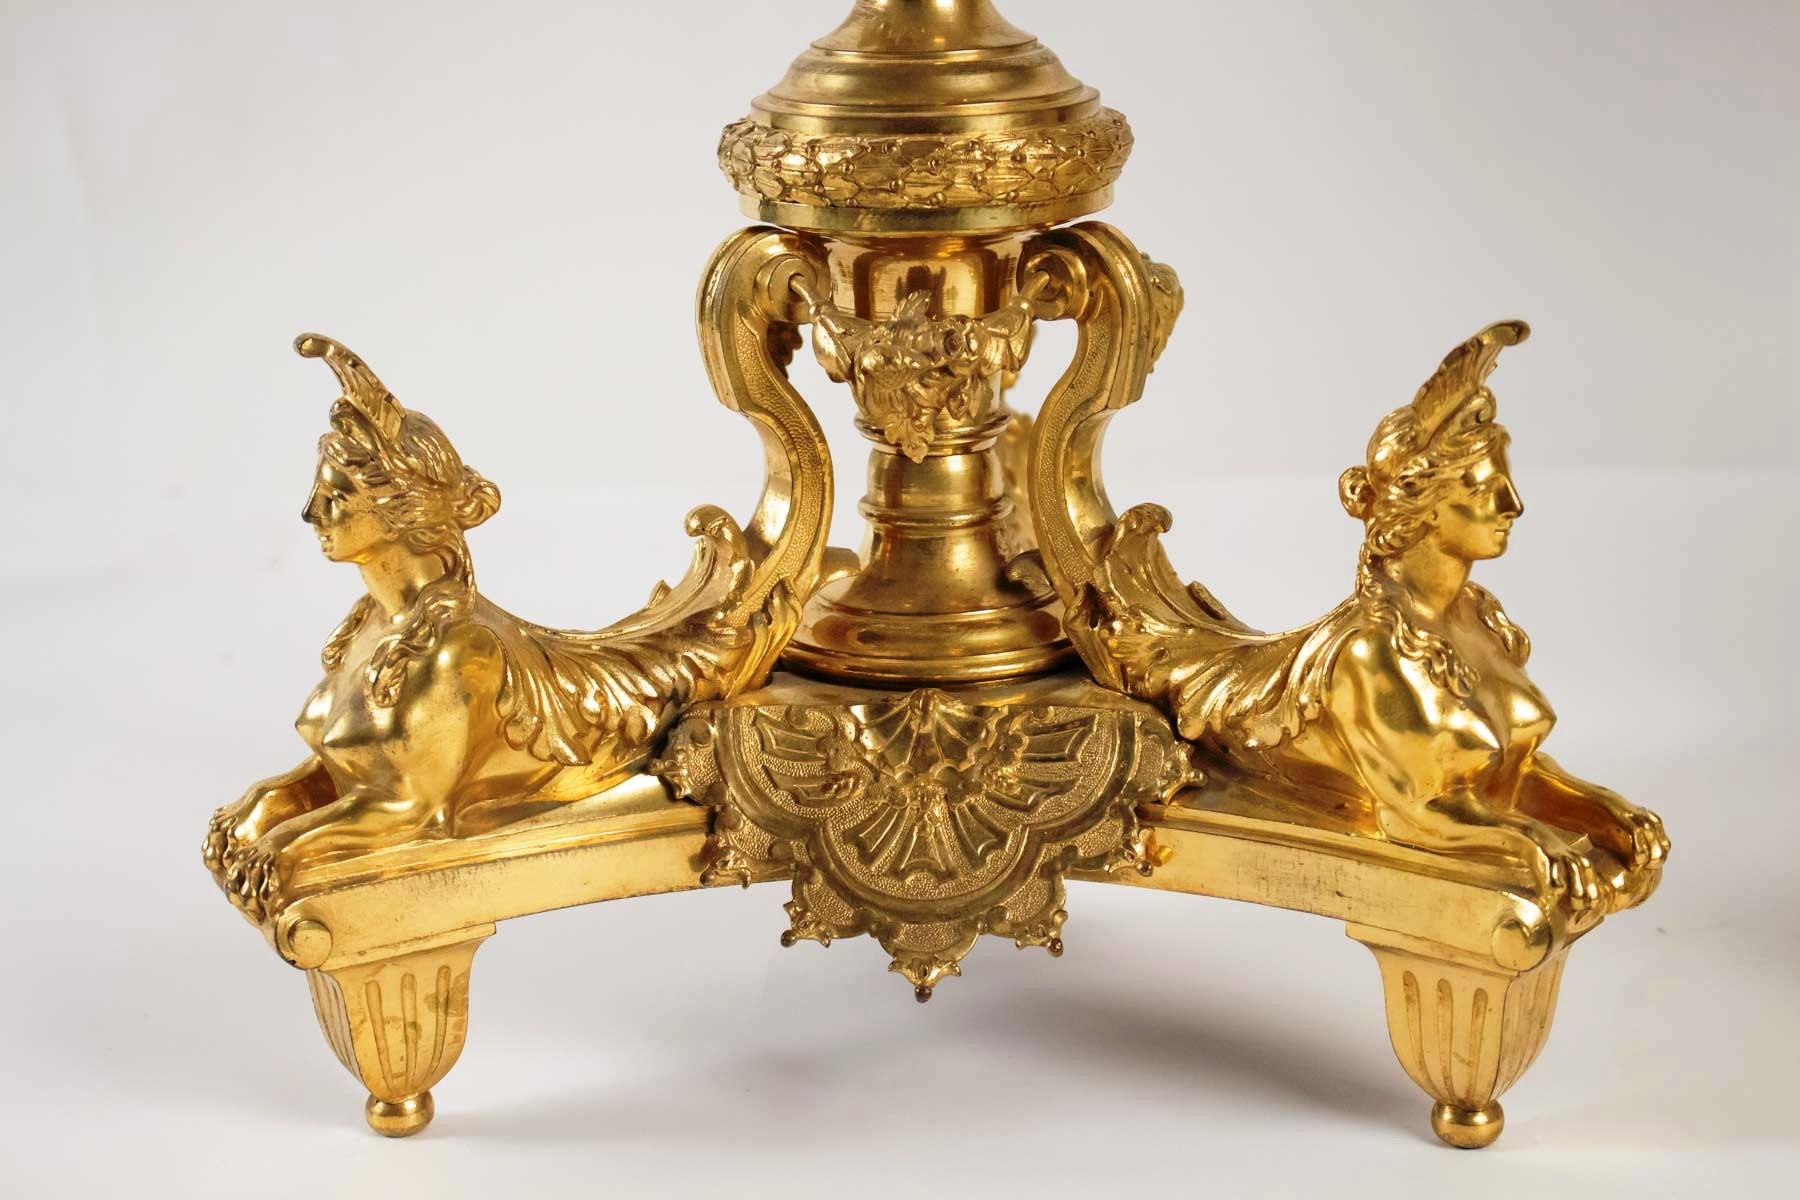 Rare Pair of Gilt Bronze Candelabras, after A-C Boulle France, Late 19th Century (Vergoldet)